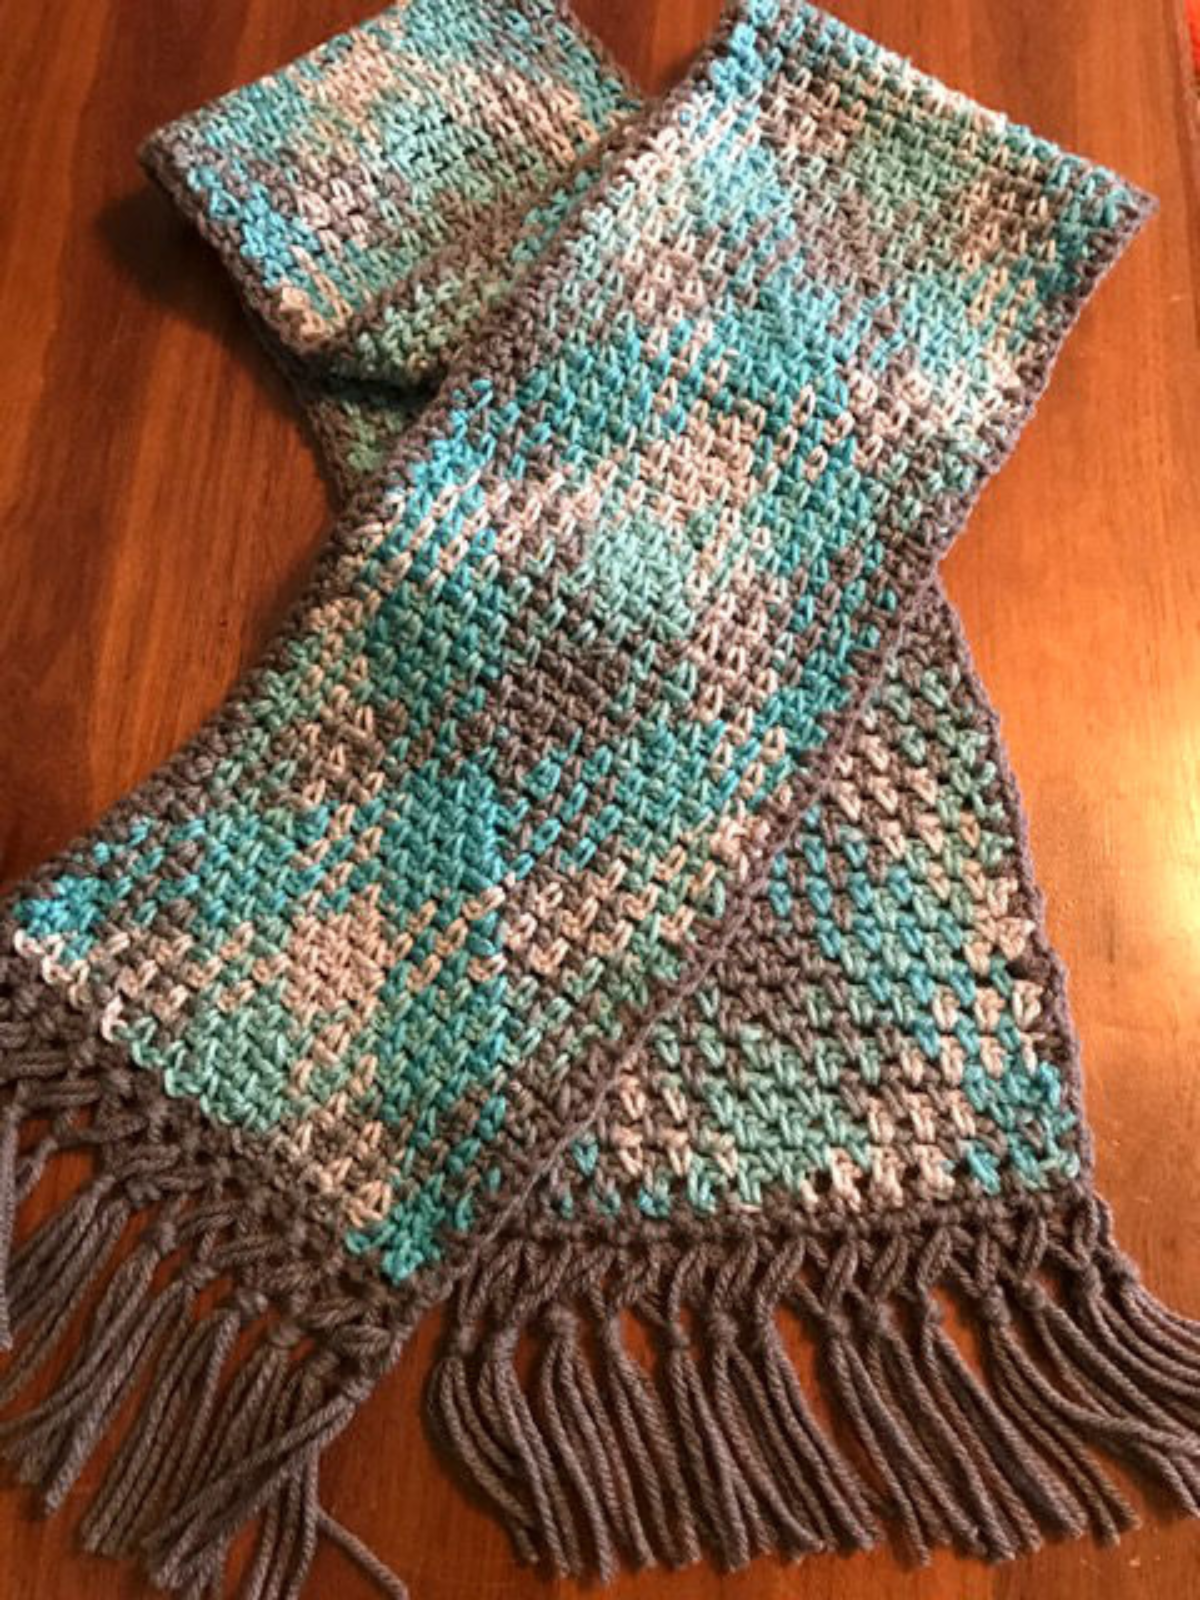 My Hobby Is Crochet: Tutorial: How to Crochet Planned Color Pooling with  Long Color Changing Variegated Yarn + Ribbed Scarf/ Cowl Pattern